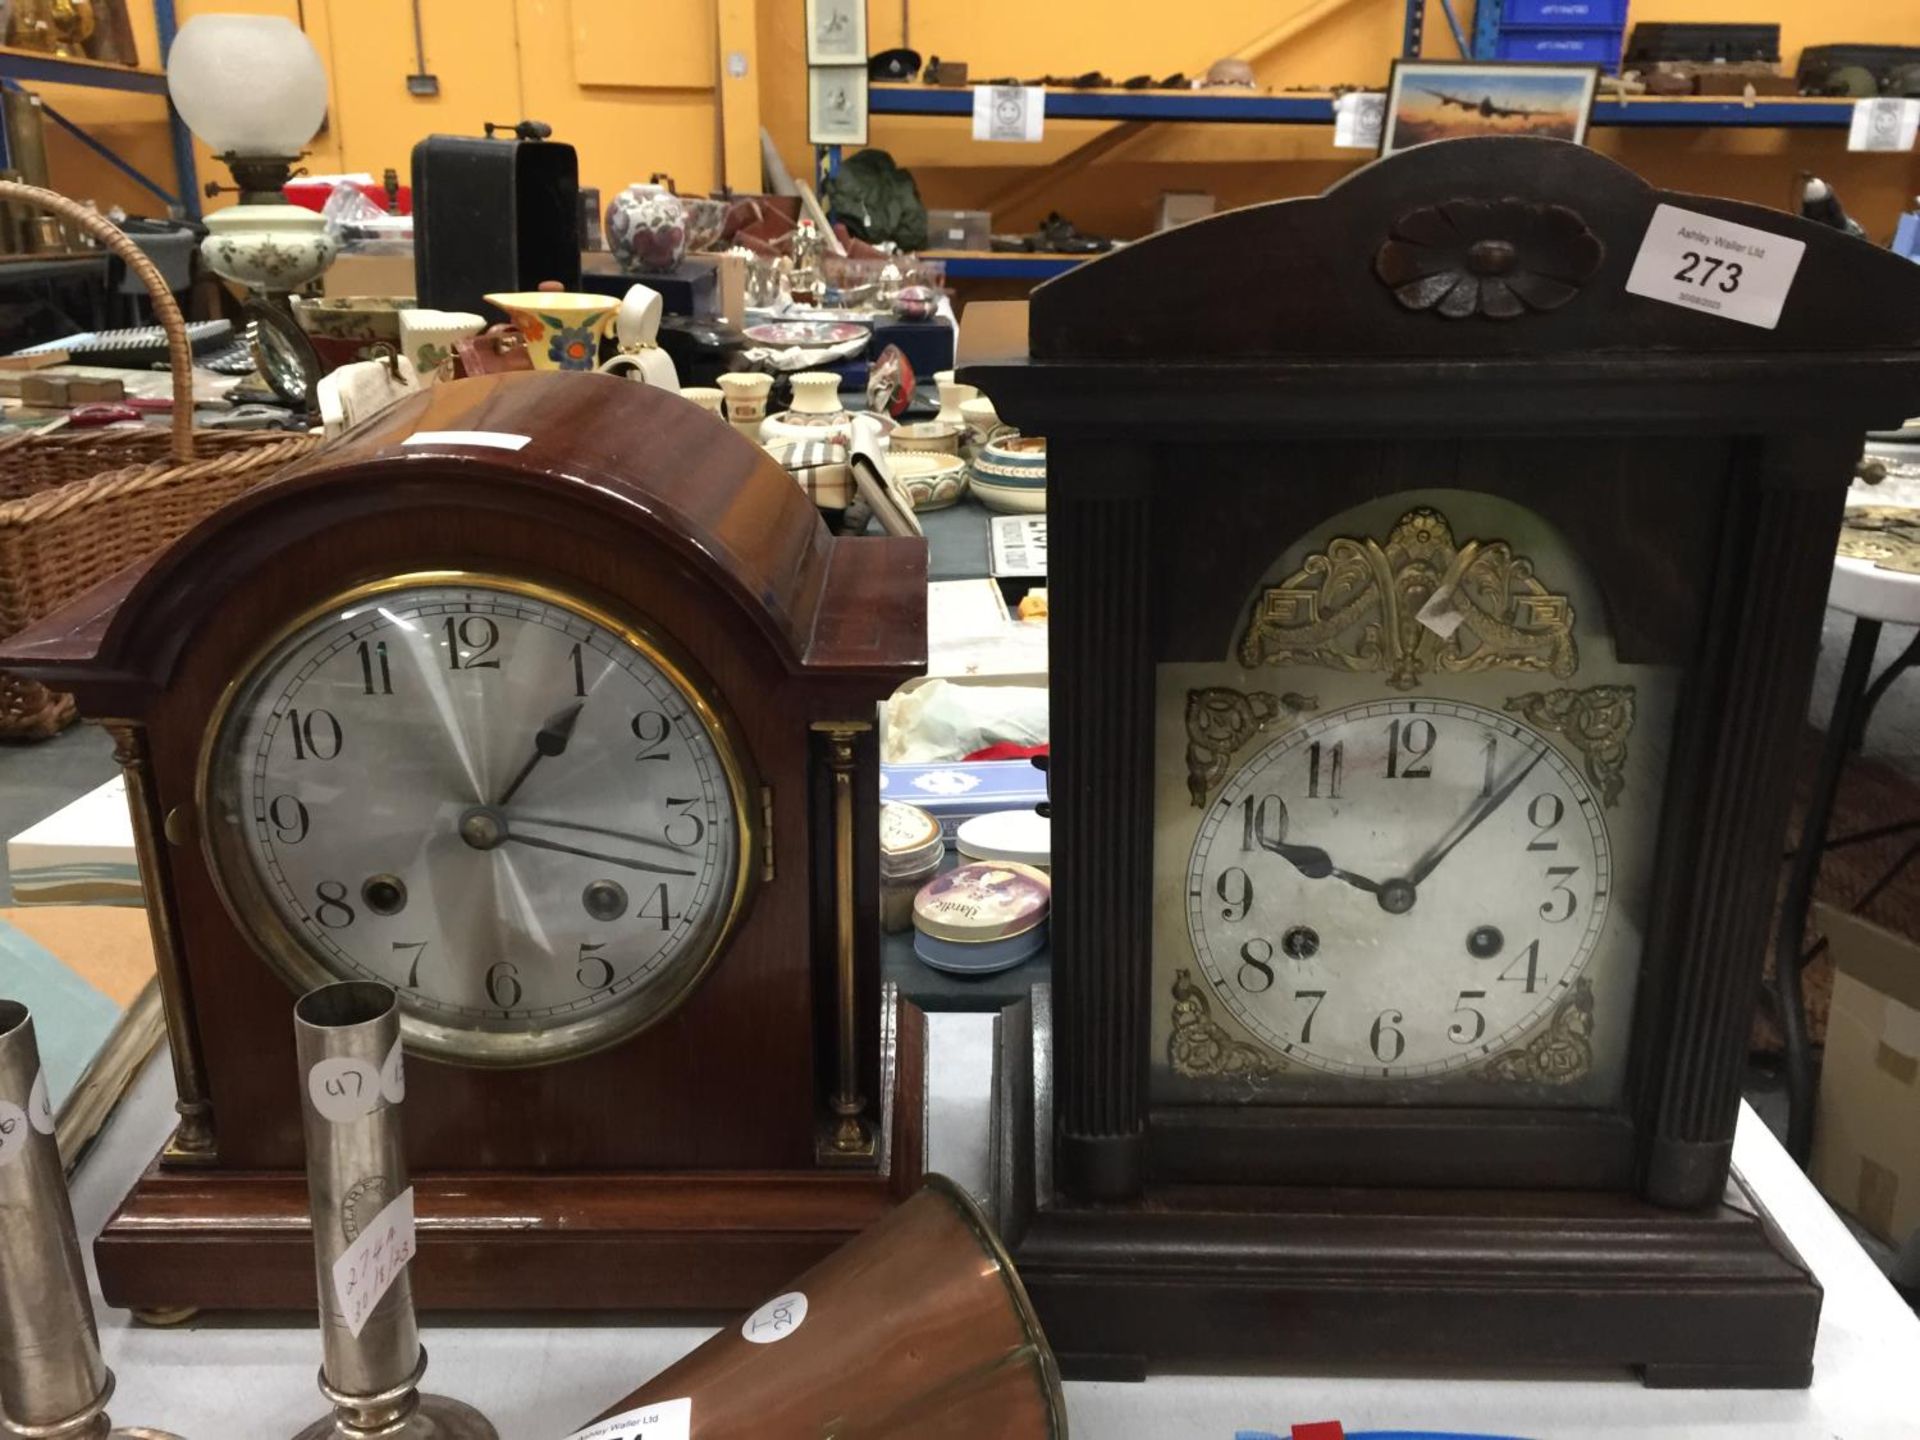 TWO VINTAGE MANTLE CLOCKS, ONE WITH NEWHAVEN MOVEMENT, THE OTHER WITH JUNGHANS MOVEMENT, BOTH WITH